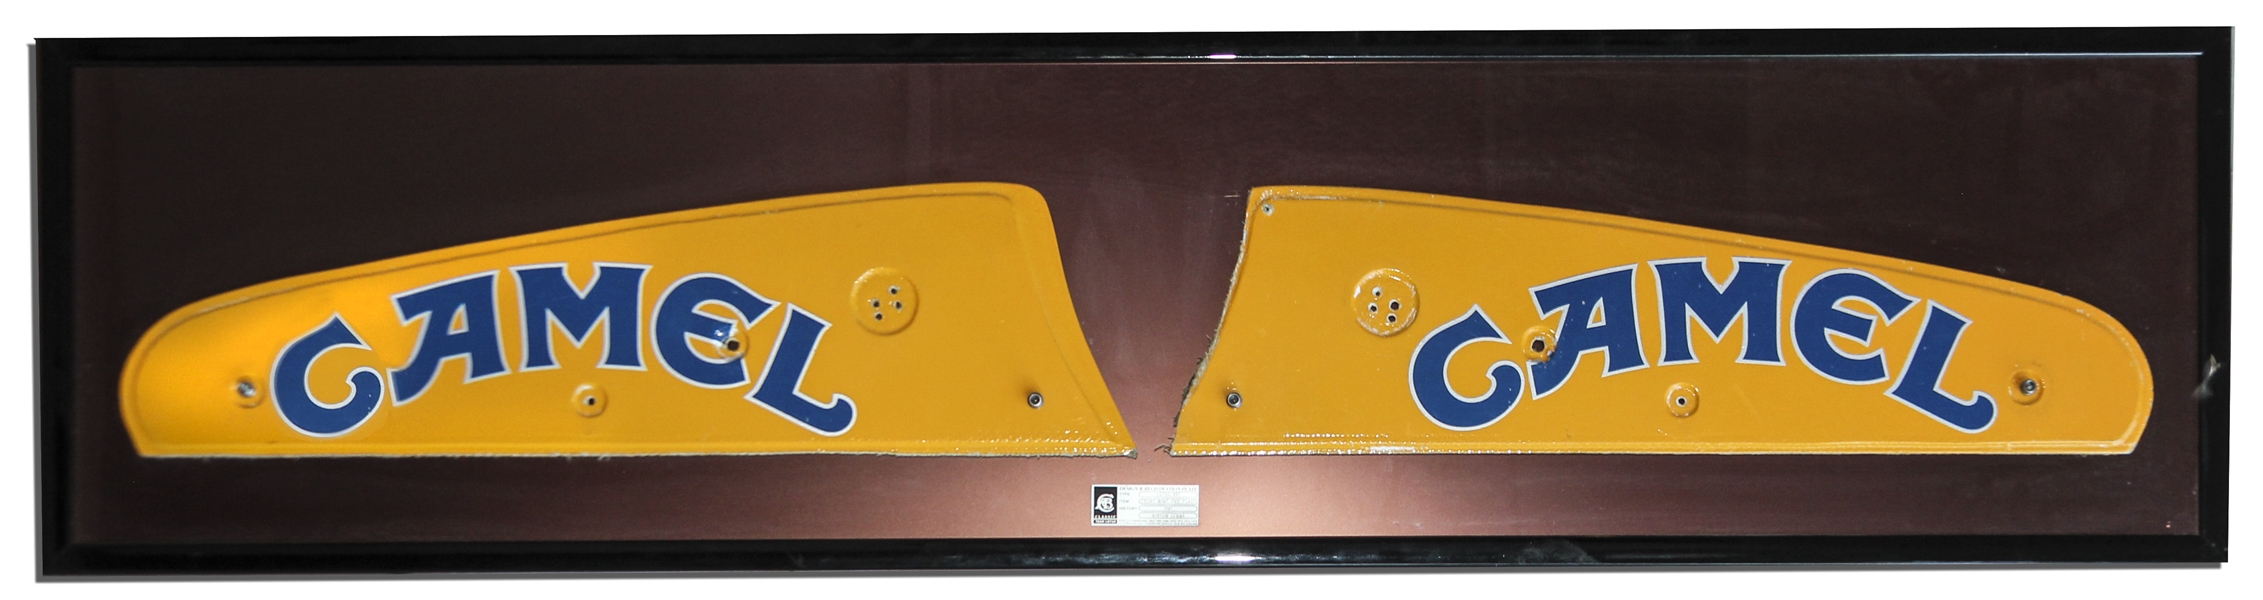 Ayrton Senna's Pair of Race-Used Front Wing End Plates From His Lotus 99T Car -- The Car That Won the Monaco & Detroit Grand Prix